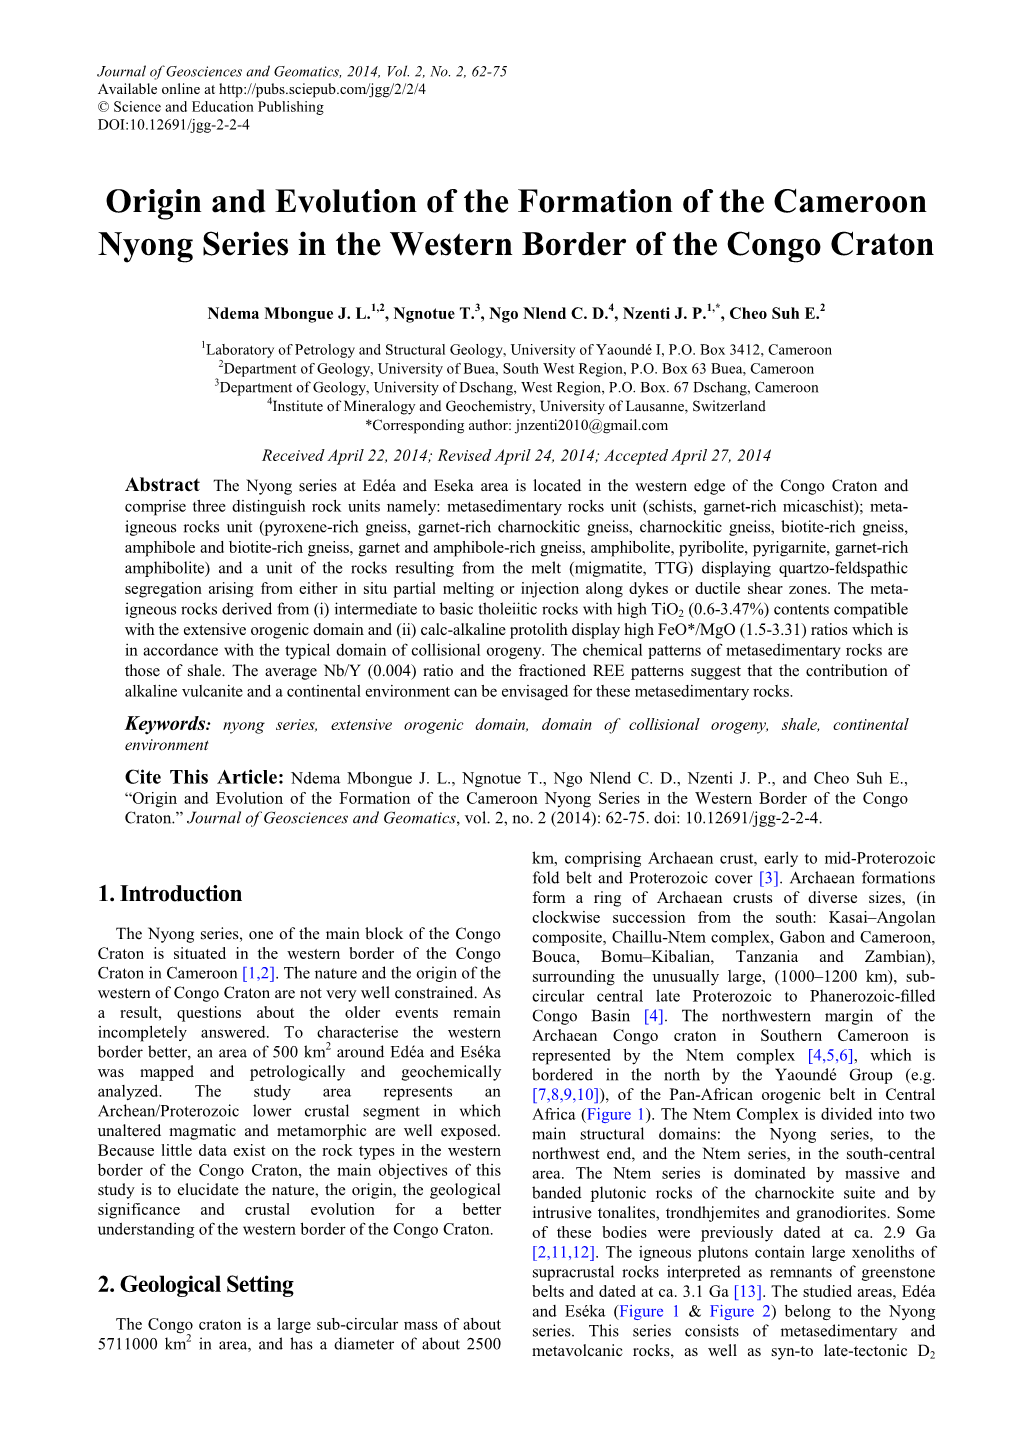 Origin and Evolution of the Formation of the Cameroon Nyong Series in the Western Border of the Congo Craton